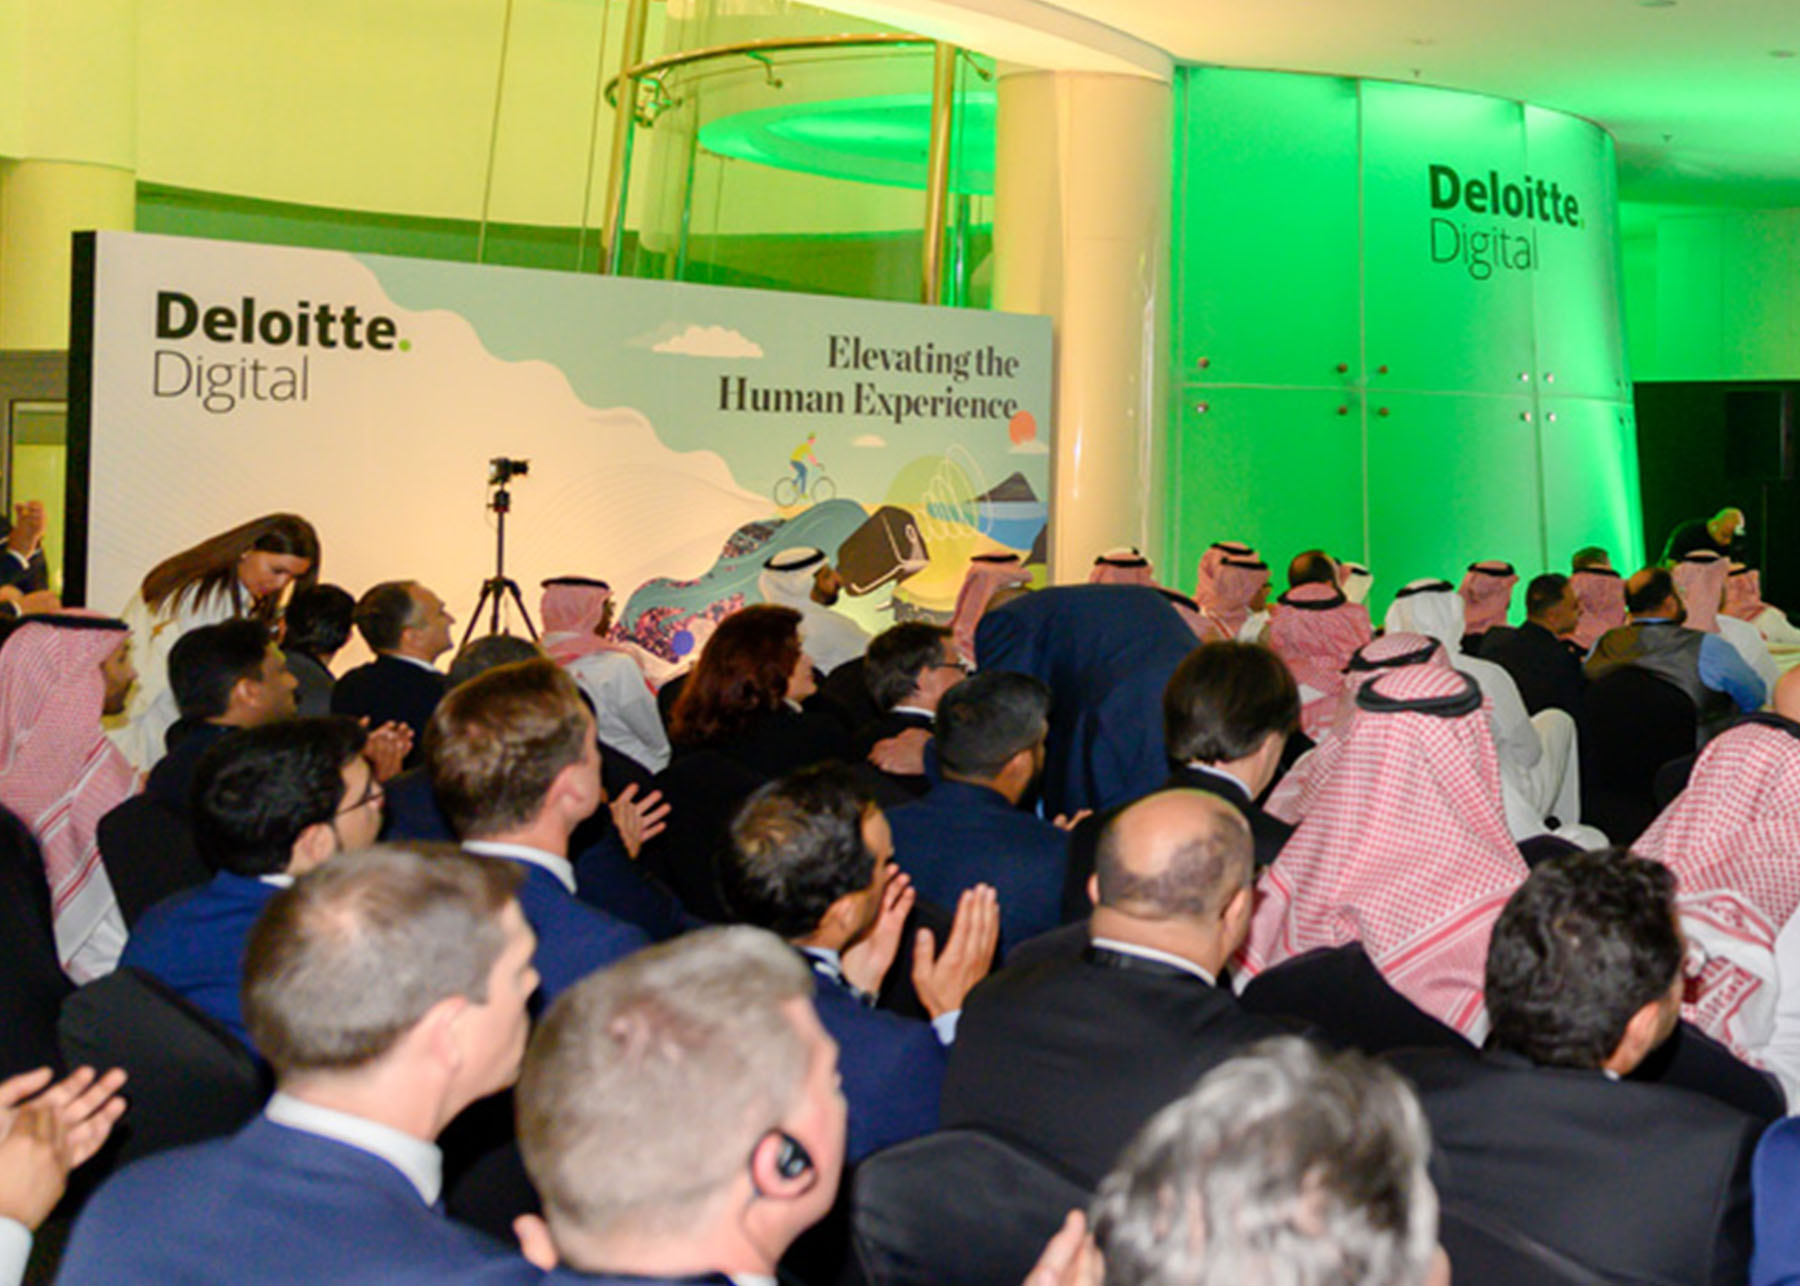 Audience in the Deloitte event